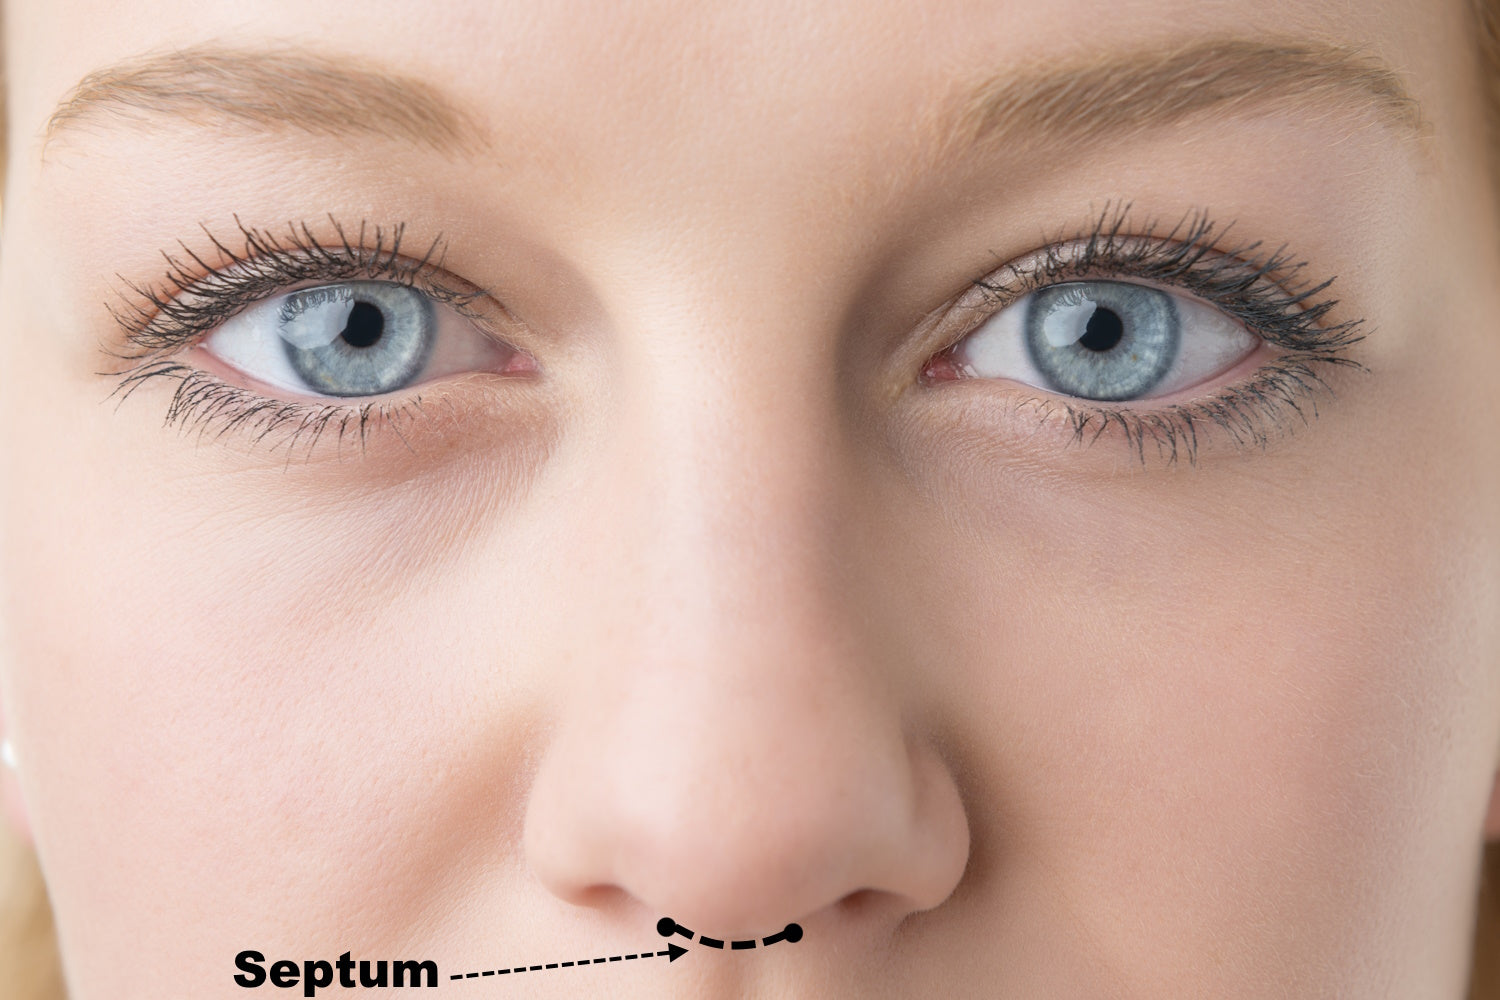 The location of a septum piercing on a models face.